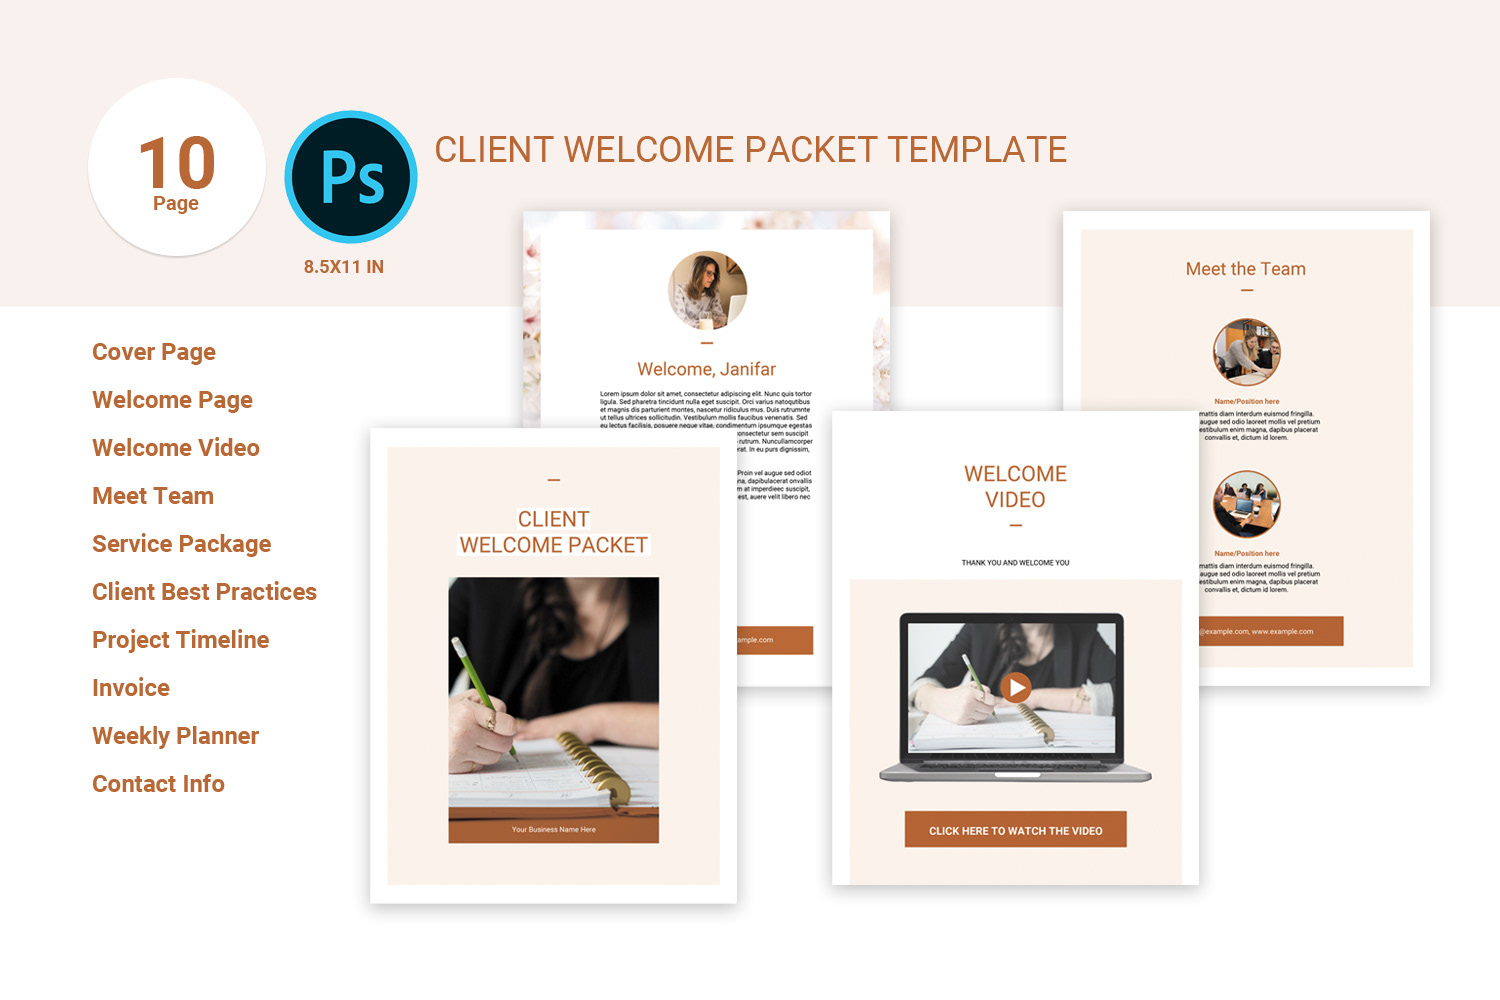 Packet client. Our clients Template.